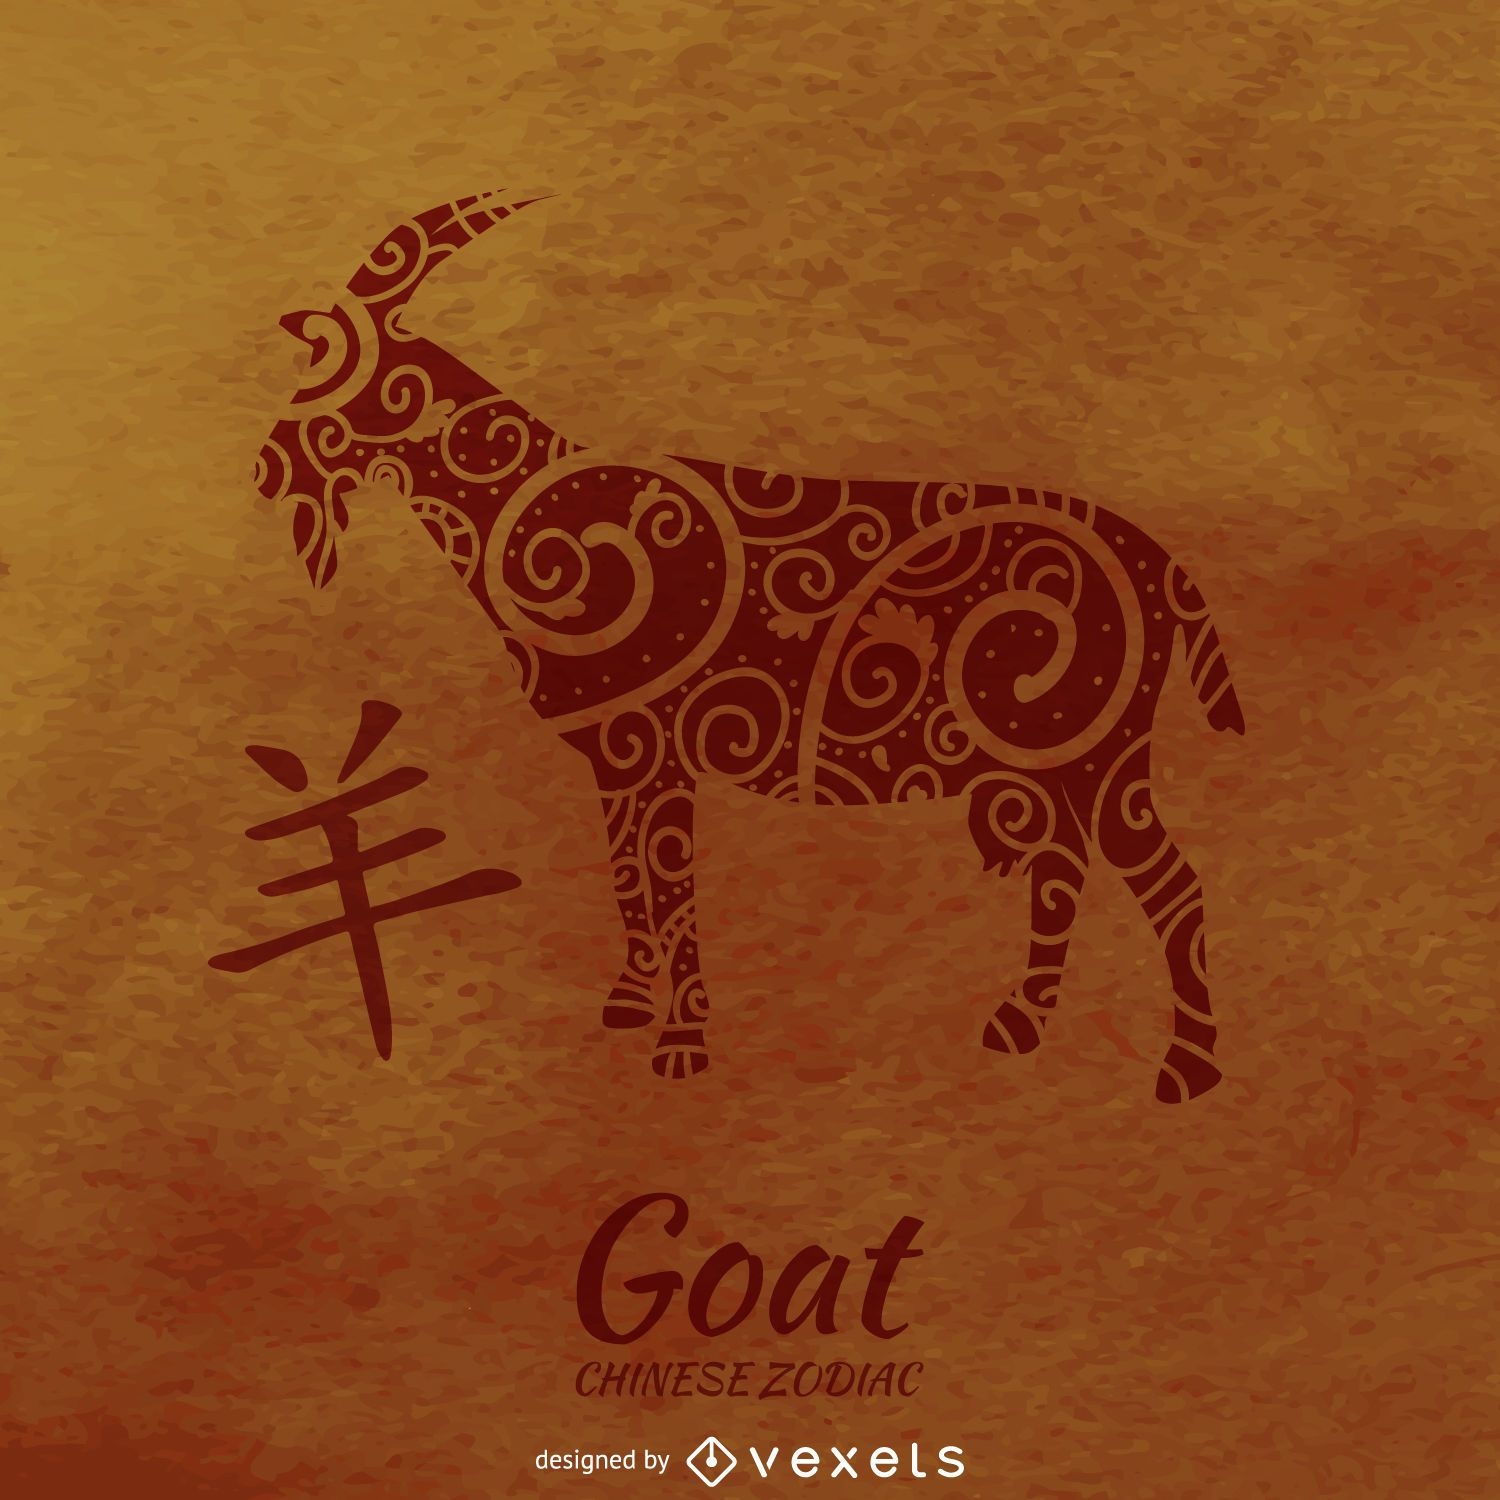 20 Goat Chinese Zodiac Sign Chinese New Year Paintbrush Illustrations  RoyaltyFree Vector Graphics  Clip Art  iStock